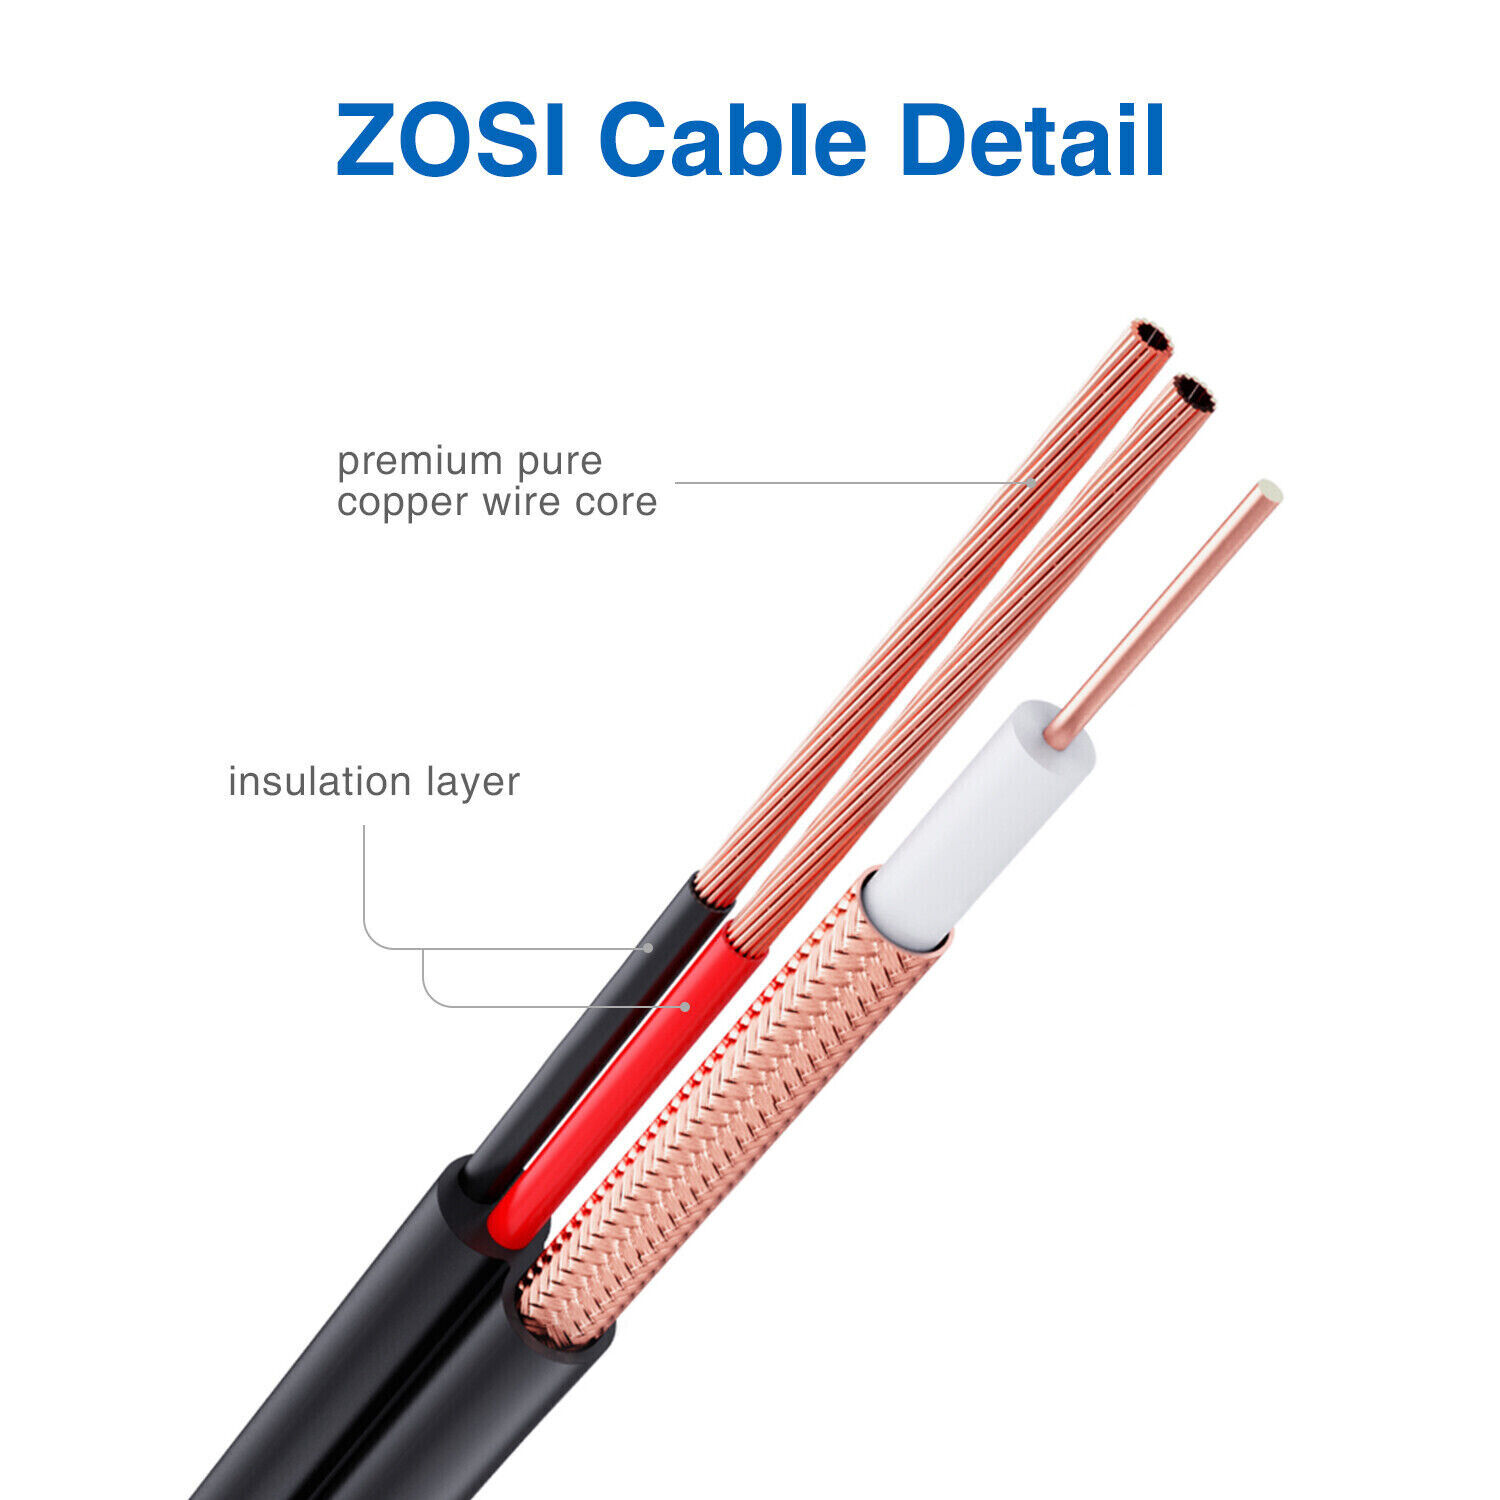 ZOSI 4 PCS 60FT 18M CCTV Security Camera Video Power BNC Cable Wires for DVR ZOSI Does Not Apply - фотография #8